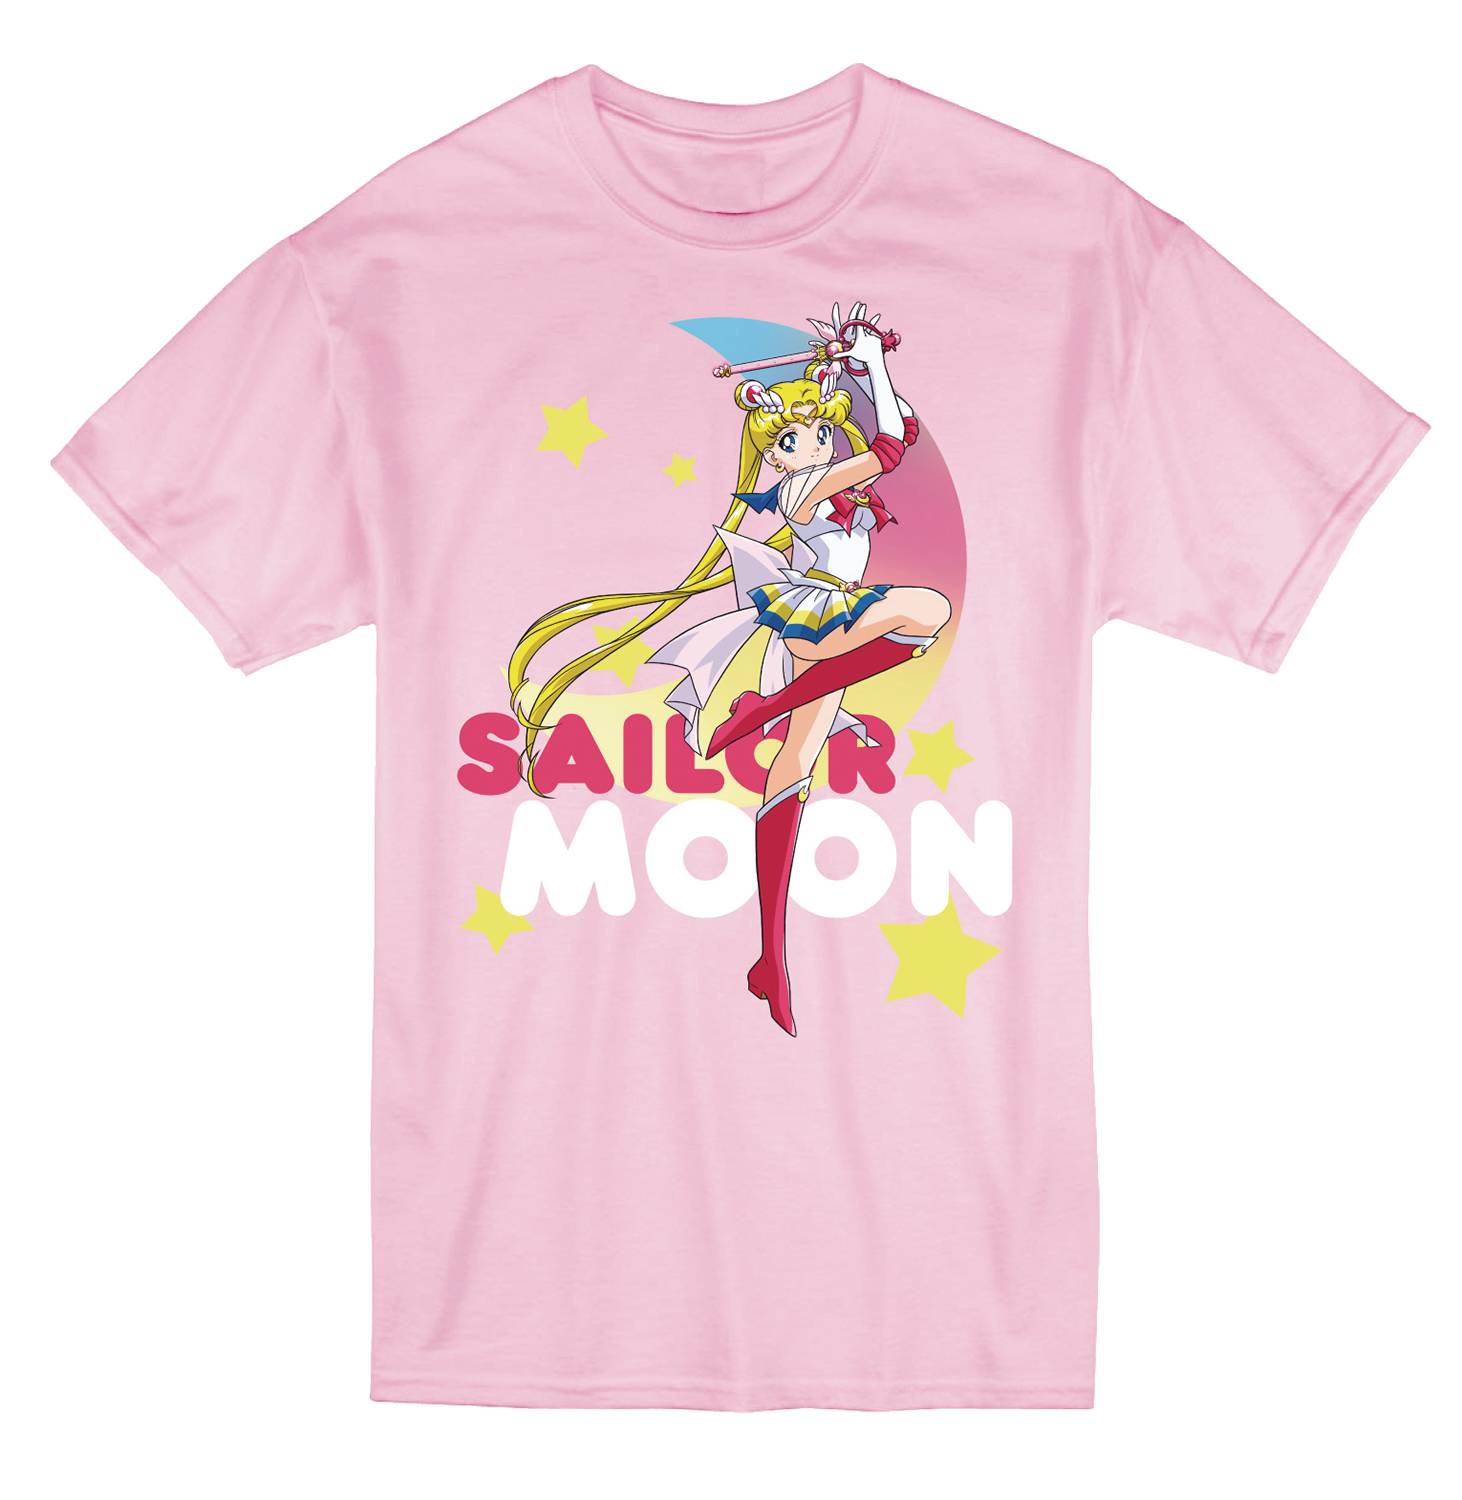 AUG202081 - SAILOR MOON SUPERS S PINK T/S XXL - Previews World